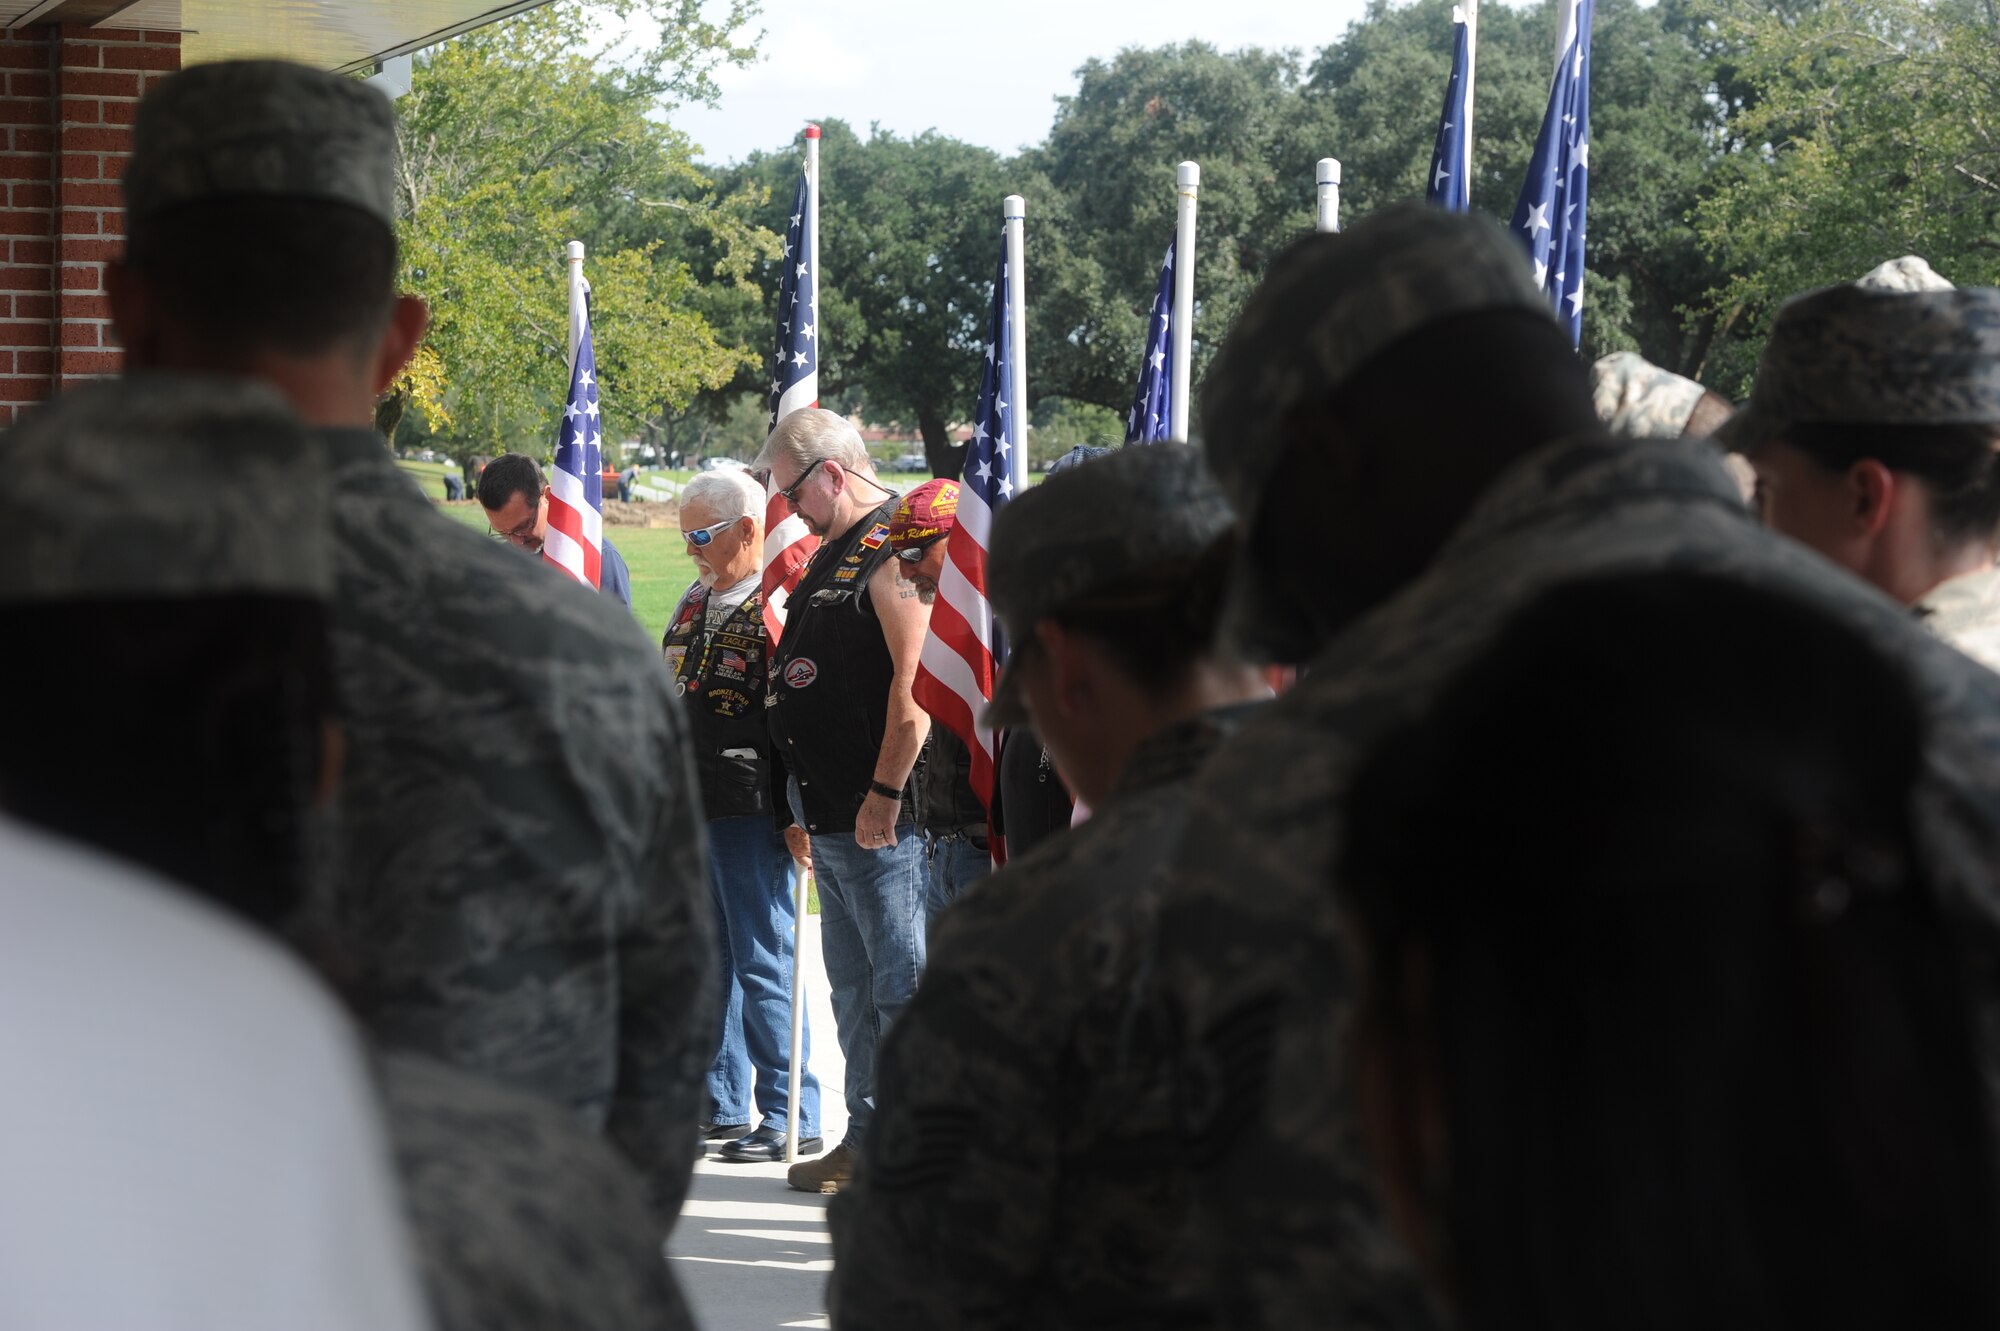 Members of the American Patriot Riders and members of Team Keesler attend a Forgotten Hero ceremony for Maj. Pierre David Junod Aug. 28, 2014, at Biloxi National Cemetery. Keesler personnel, members of the American Patriot Riders, and parishioners of the Nourishing Place chapel attended the ceremony to honor Junod, who had no remaining family. Junod was a U.S. Air Force navigator during the Vietnam War. (U.S. Air Force photo by Airman 1st Class Stephan Coleman)